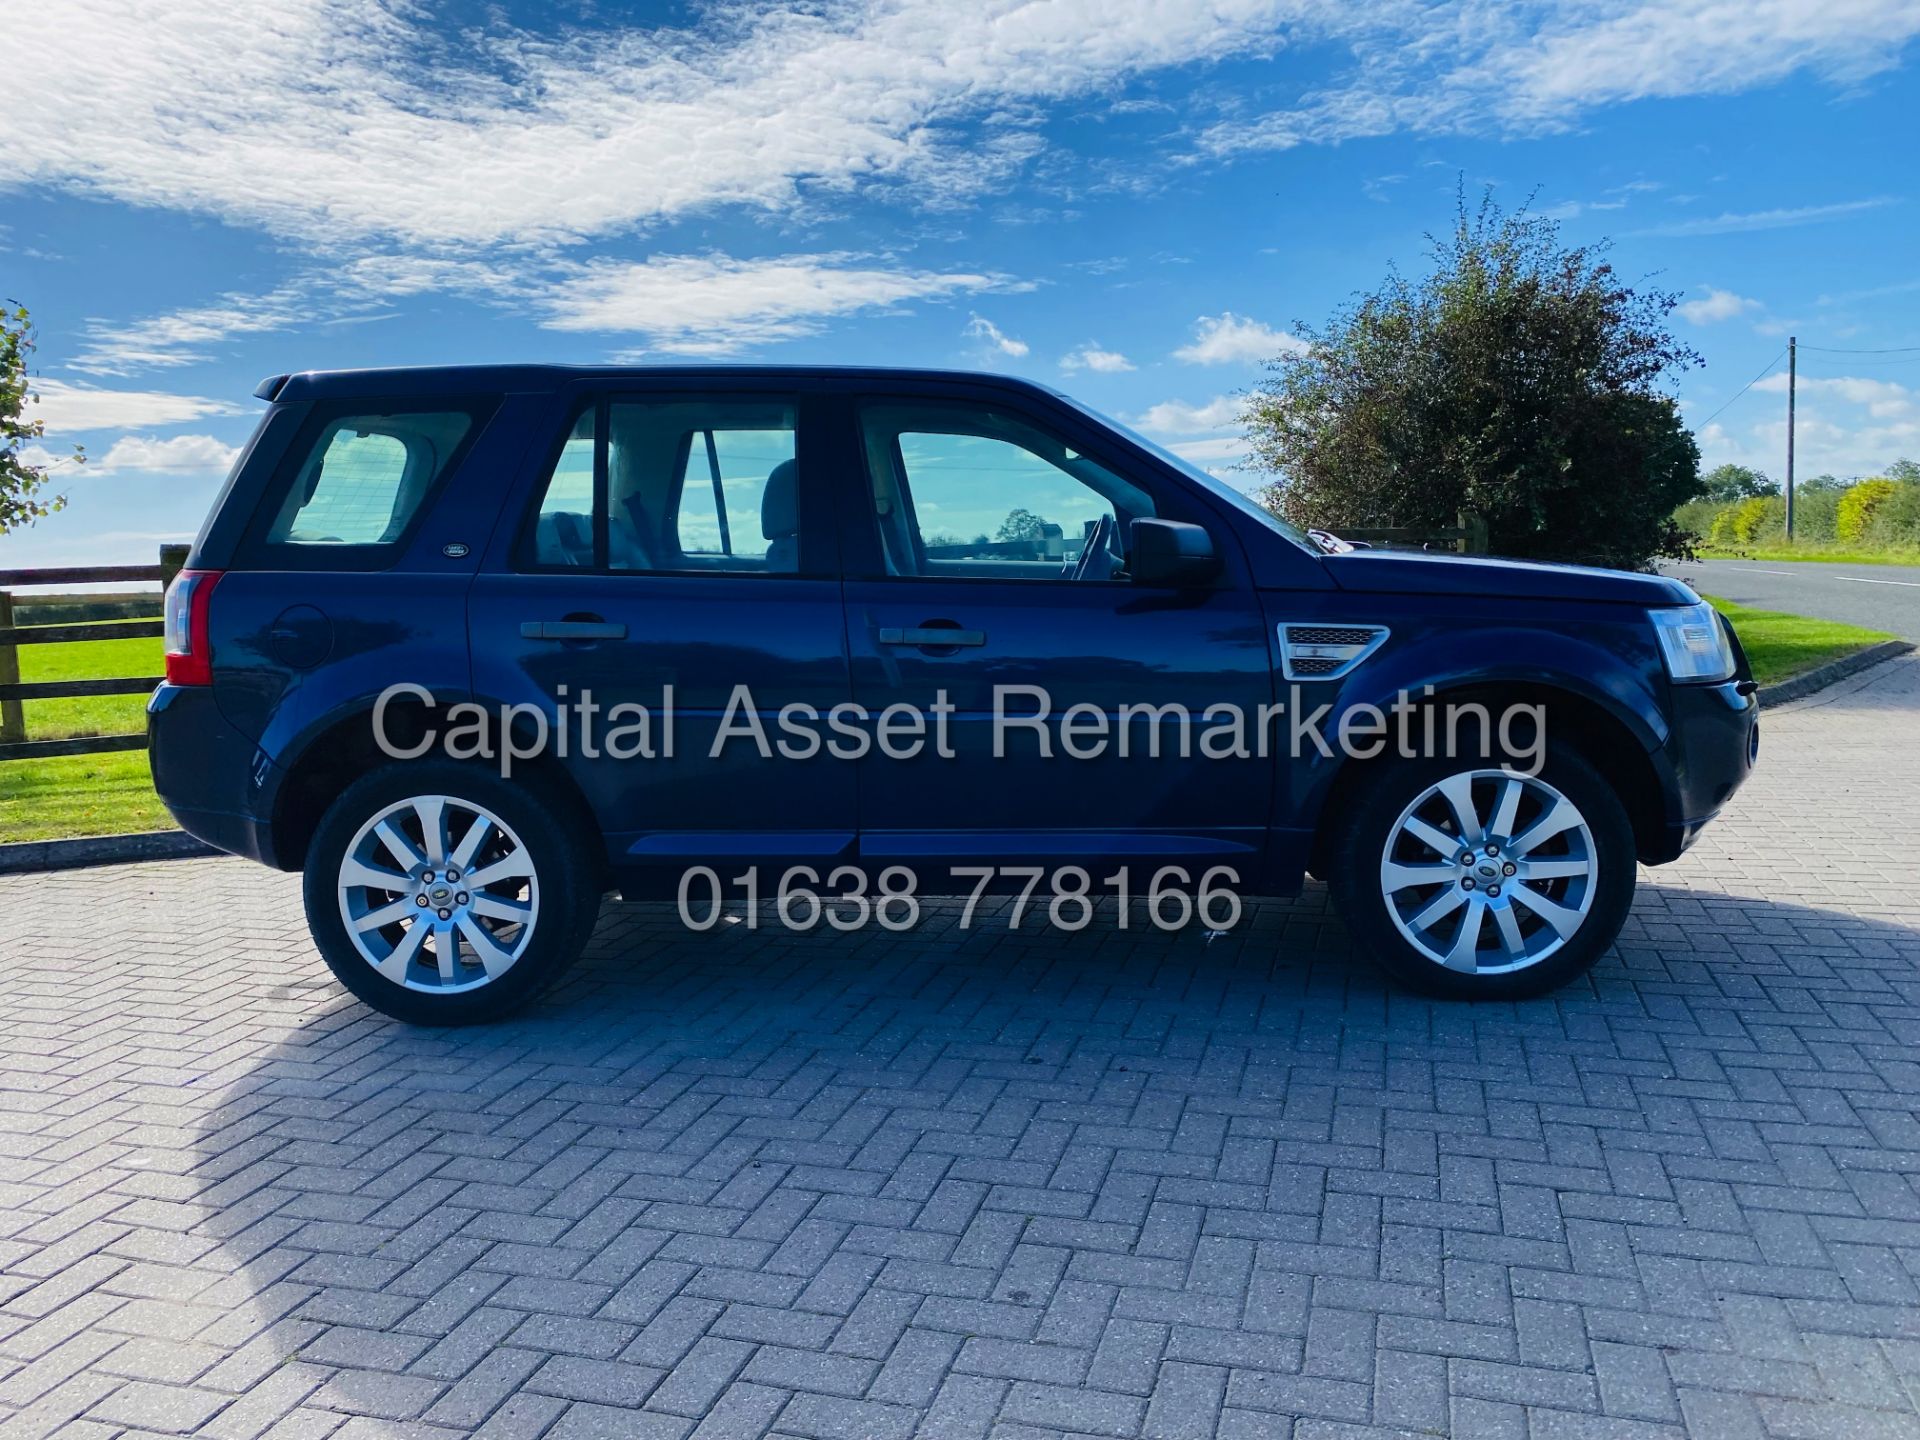 LAND ROVER FREELANDER 2.2TD4 "HSE AUTO" (2010) TOP SPEC-PAN ROOF-SAT NAV-LEATHER-ELEC EVERYTHING - Image 8 of 33